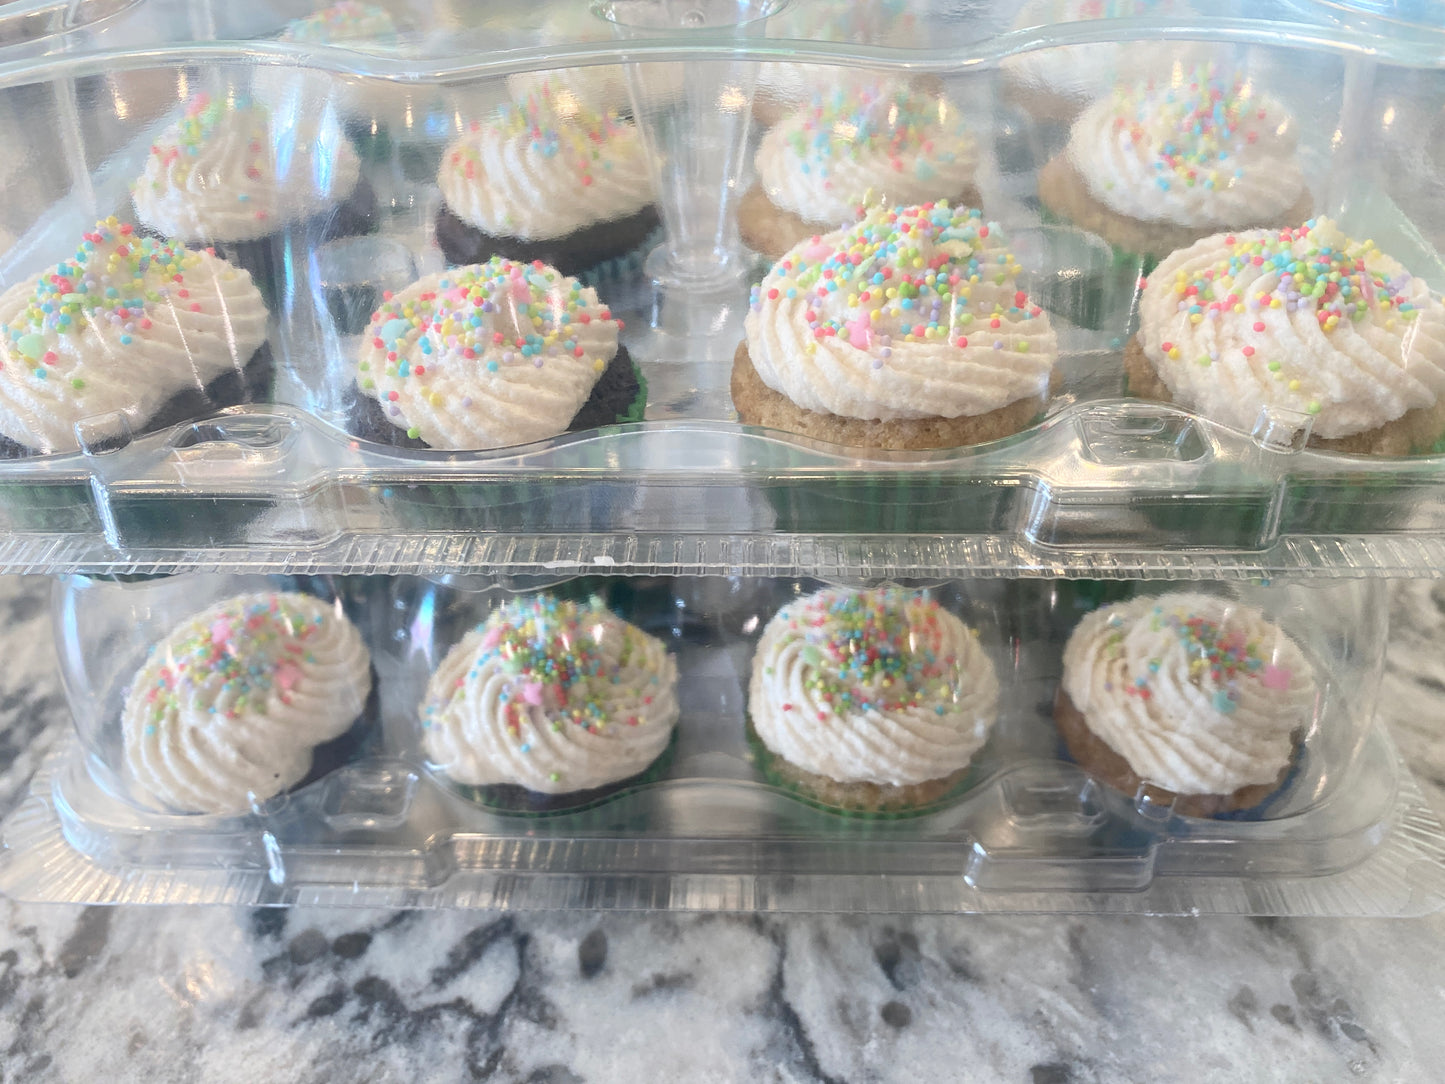 Preorder Your Delicious Set of 12 Mini Gluten-Free Vegan Cupcakes or 6 Regular Sized Cupcakes!